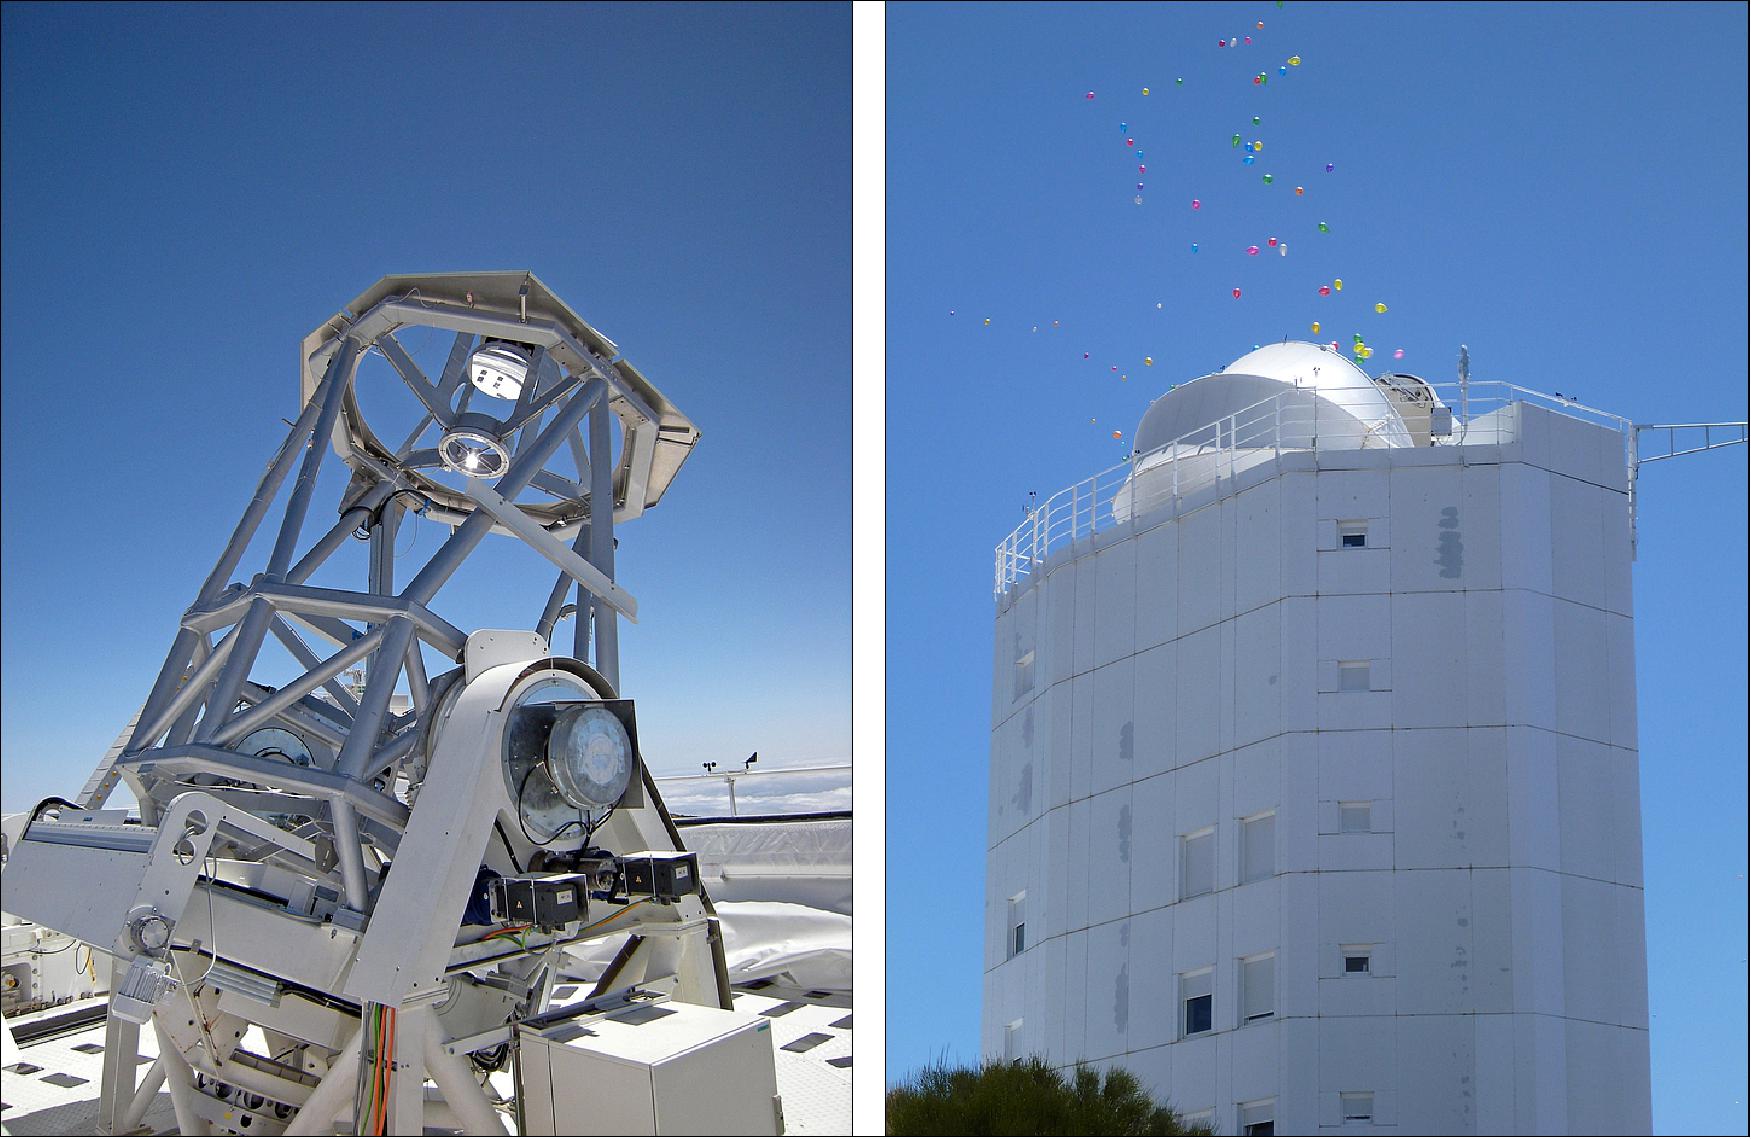 Figure 2: Left: Photo of the GREGOR telescope structure; Right: Photo of the GREGOR telescope inauguration at Teide Observatory on 21, May 2012 (image credit: GREGOR consortium)